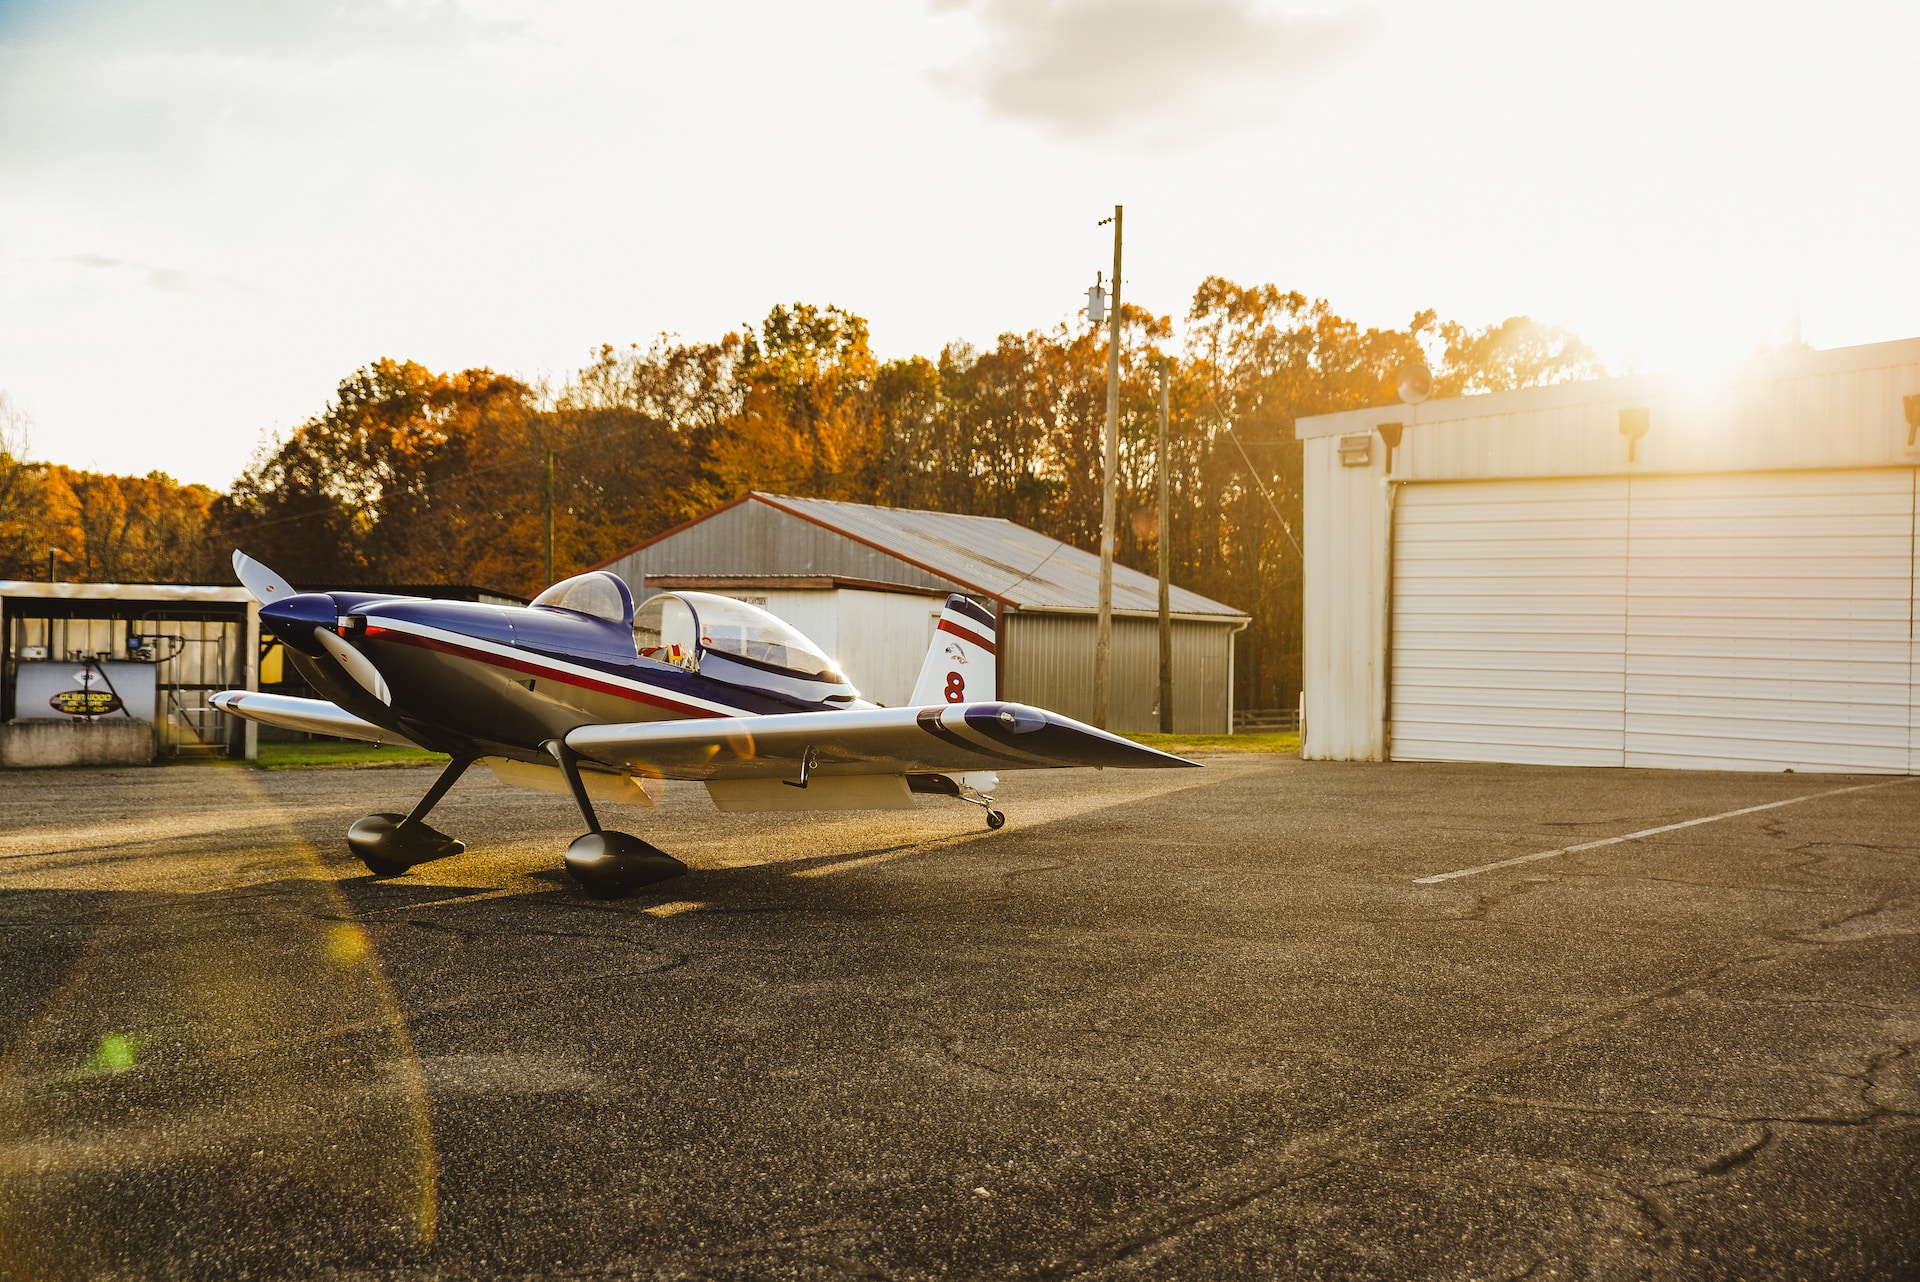 The Thrill of Flying: A Day in the Life of a Light Aircraft Pilot